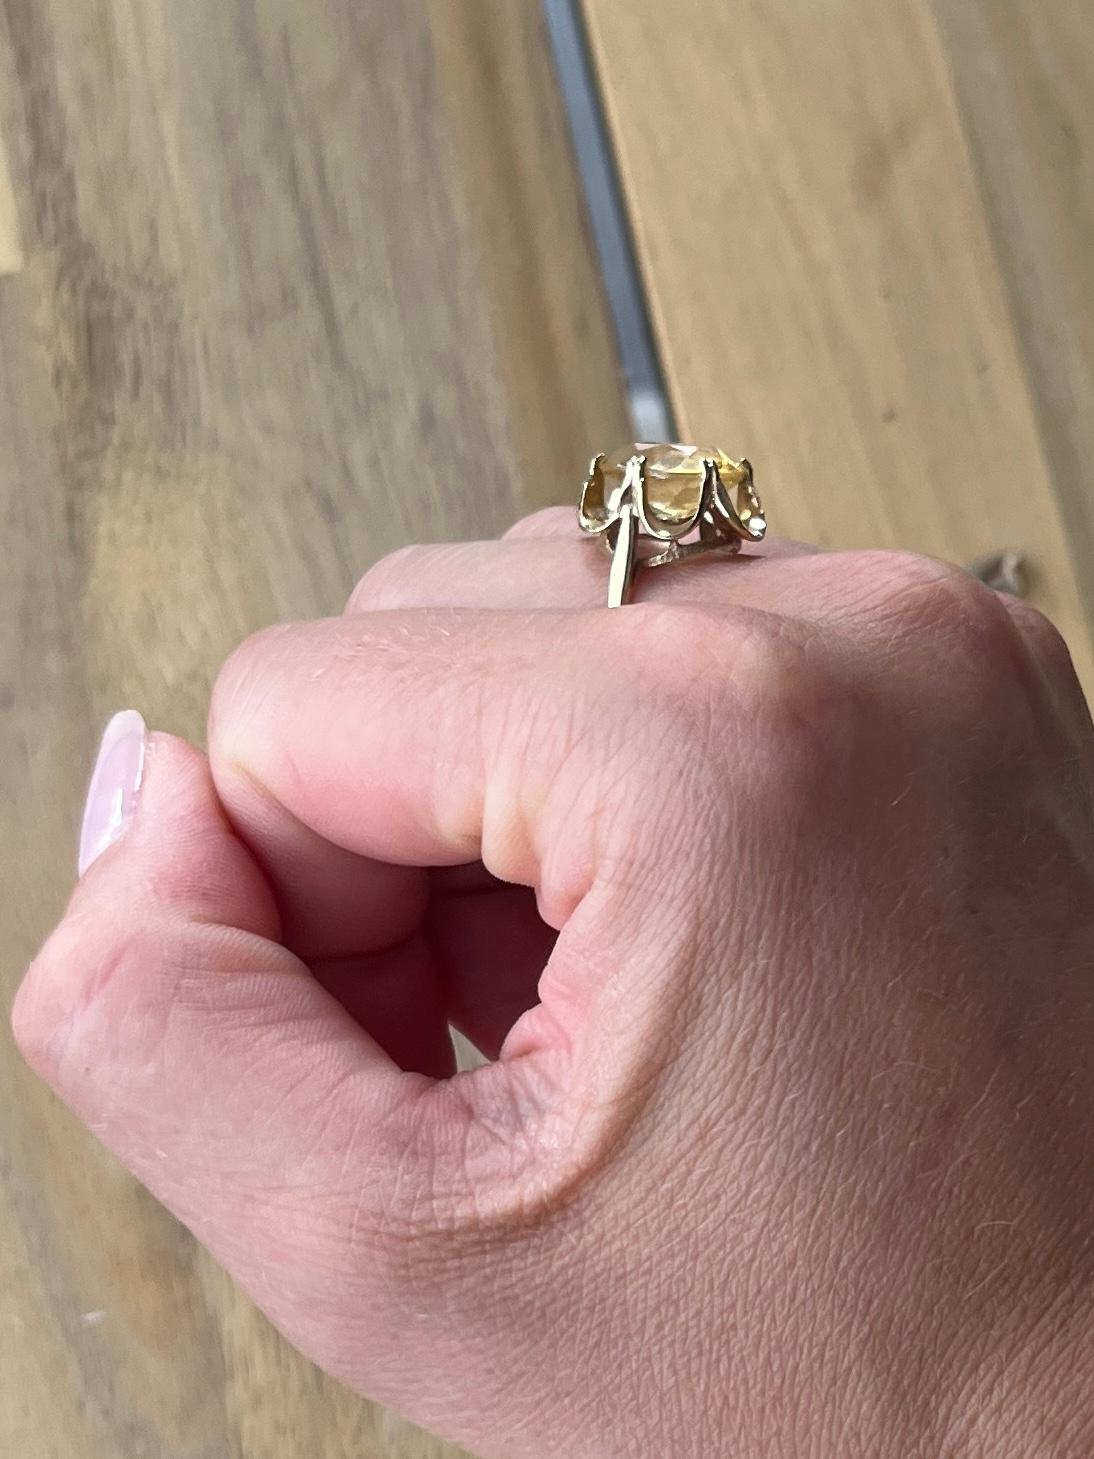 The gorgeous citrine stone is a bright yellow colour set in scalloped claws. Modelled in 9carat gold. Hallmarked London 1972.

Ring Size: L 1/2 or 6  
Stone Dimensions: 12x10.5mm
Height Off Finger: 8mm 

Weight: 3.1g